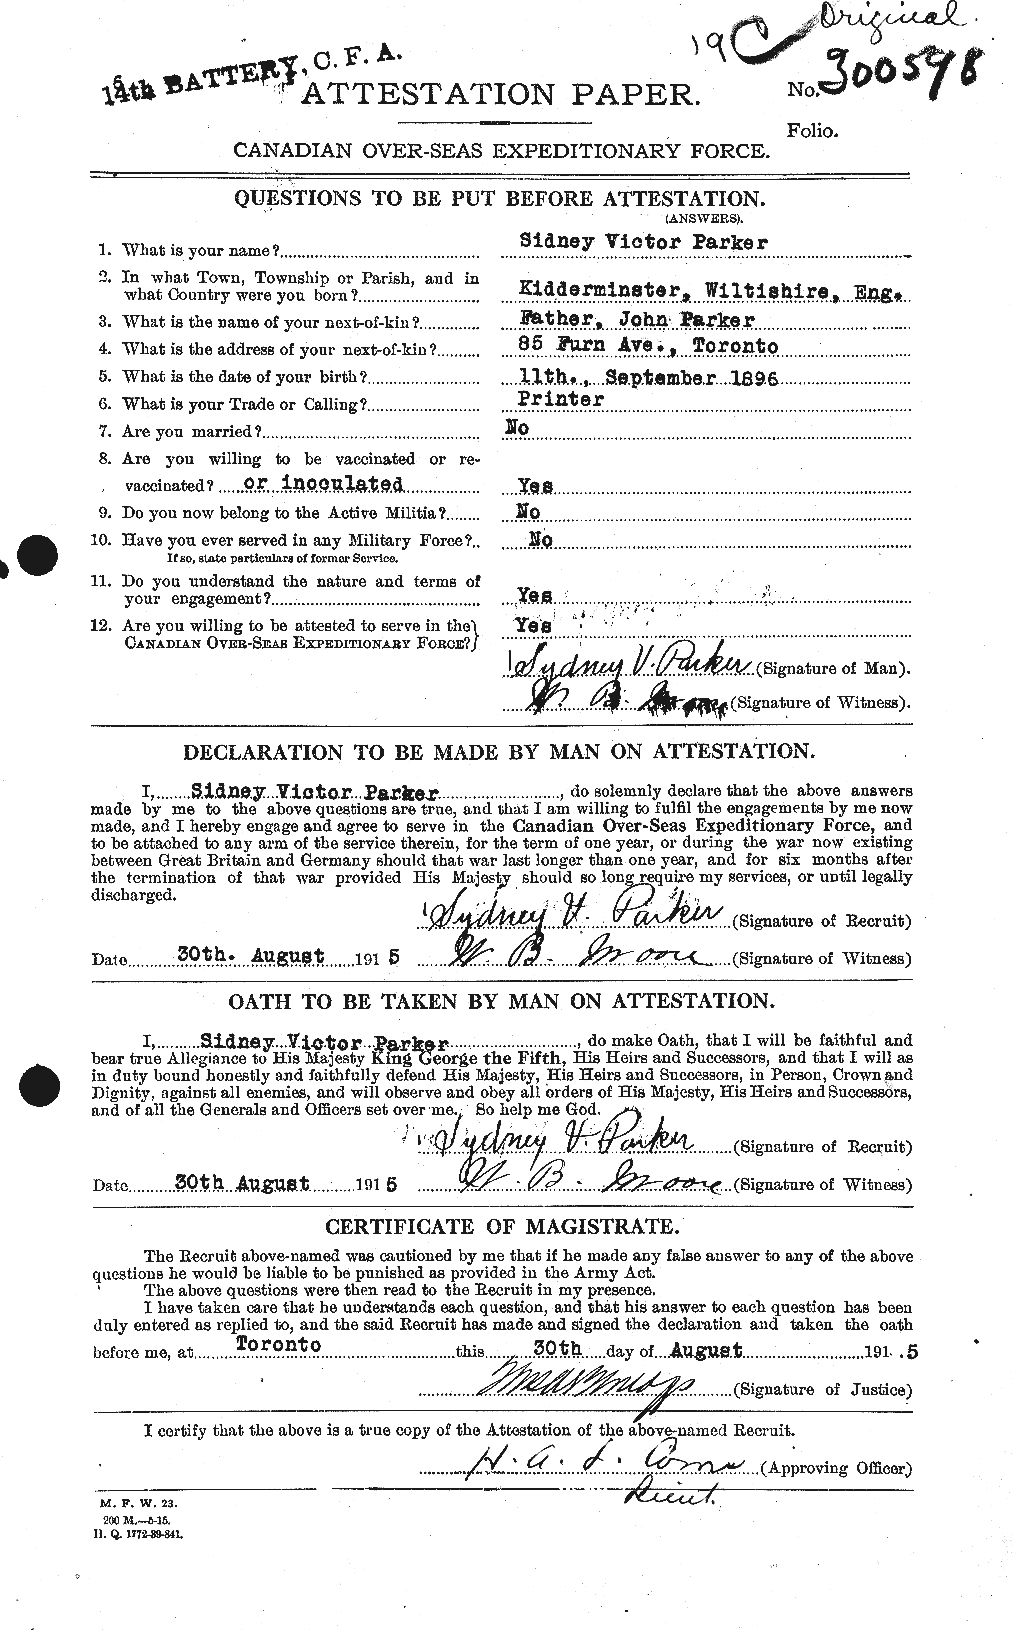 Personnel Records of the First World War - CEF 565634a